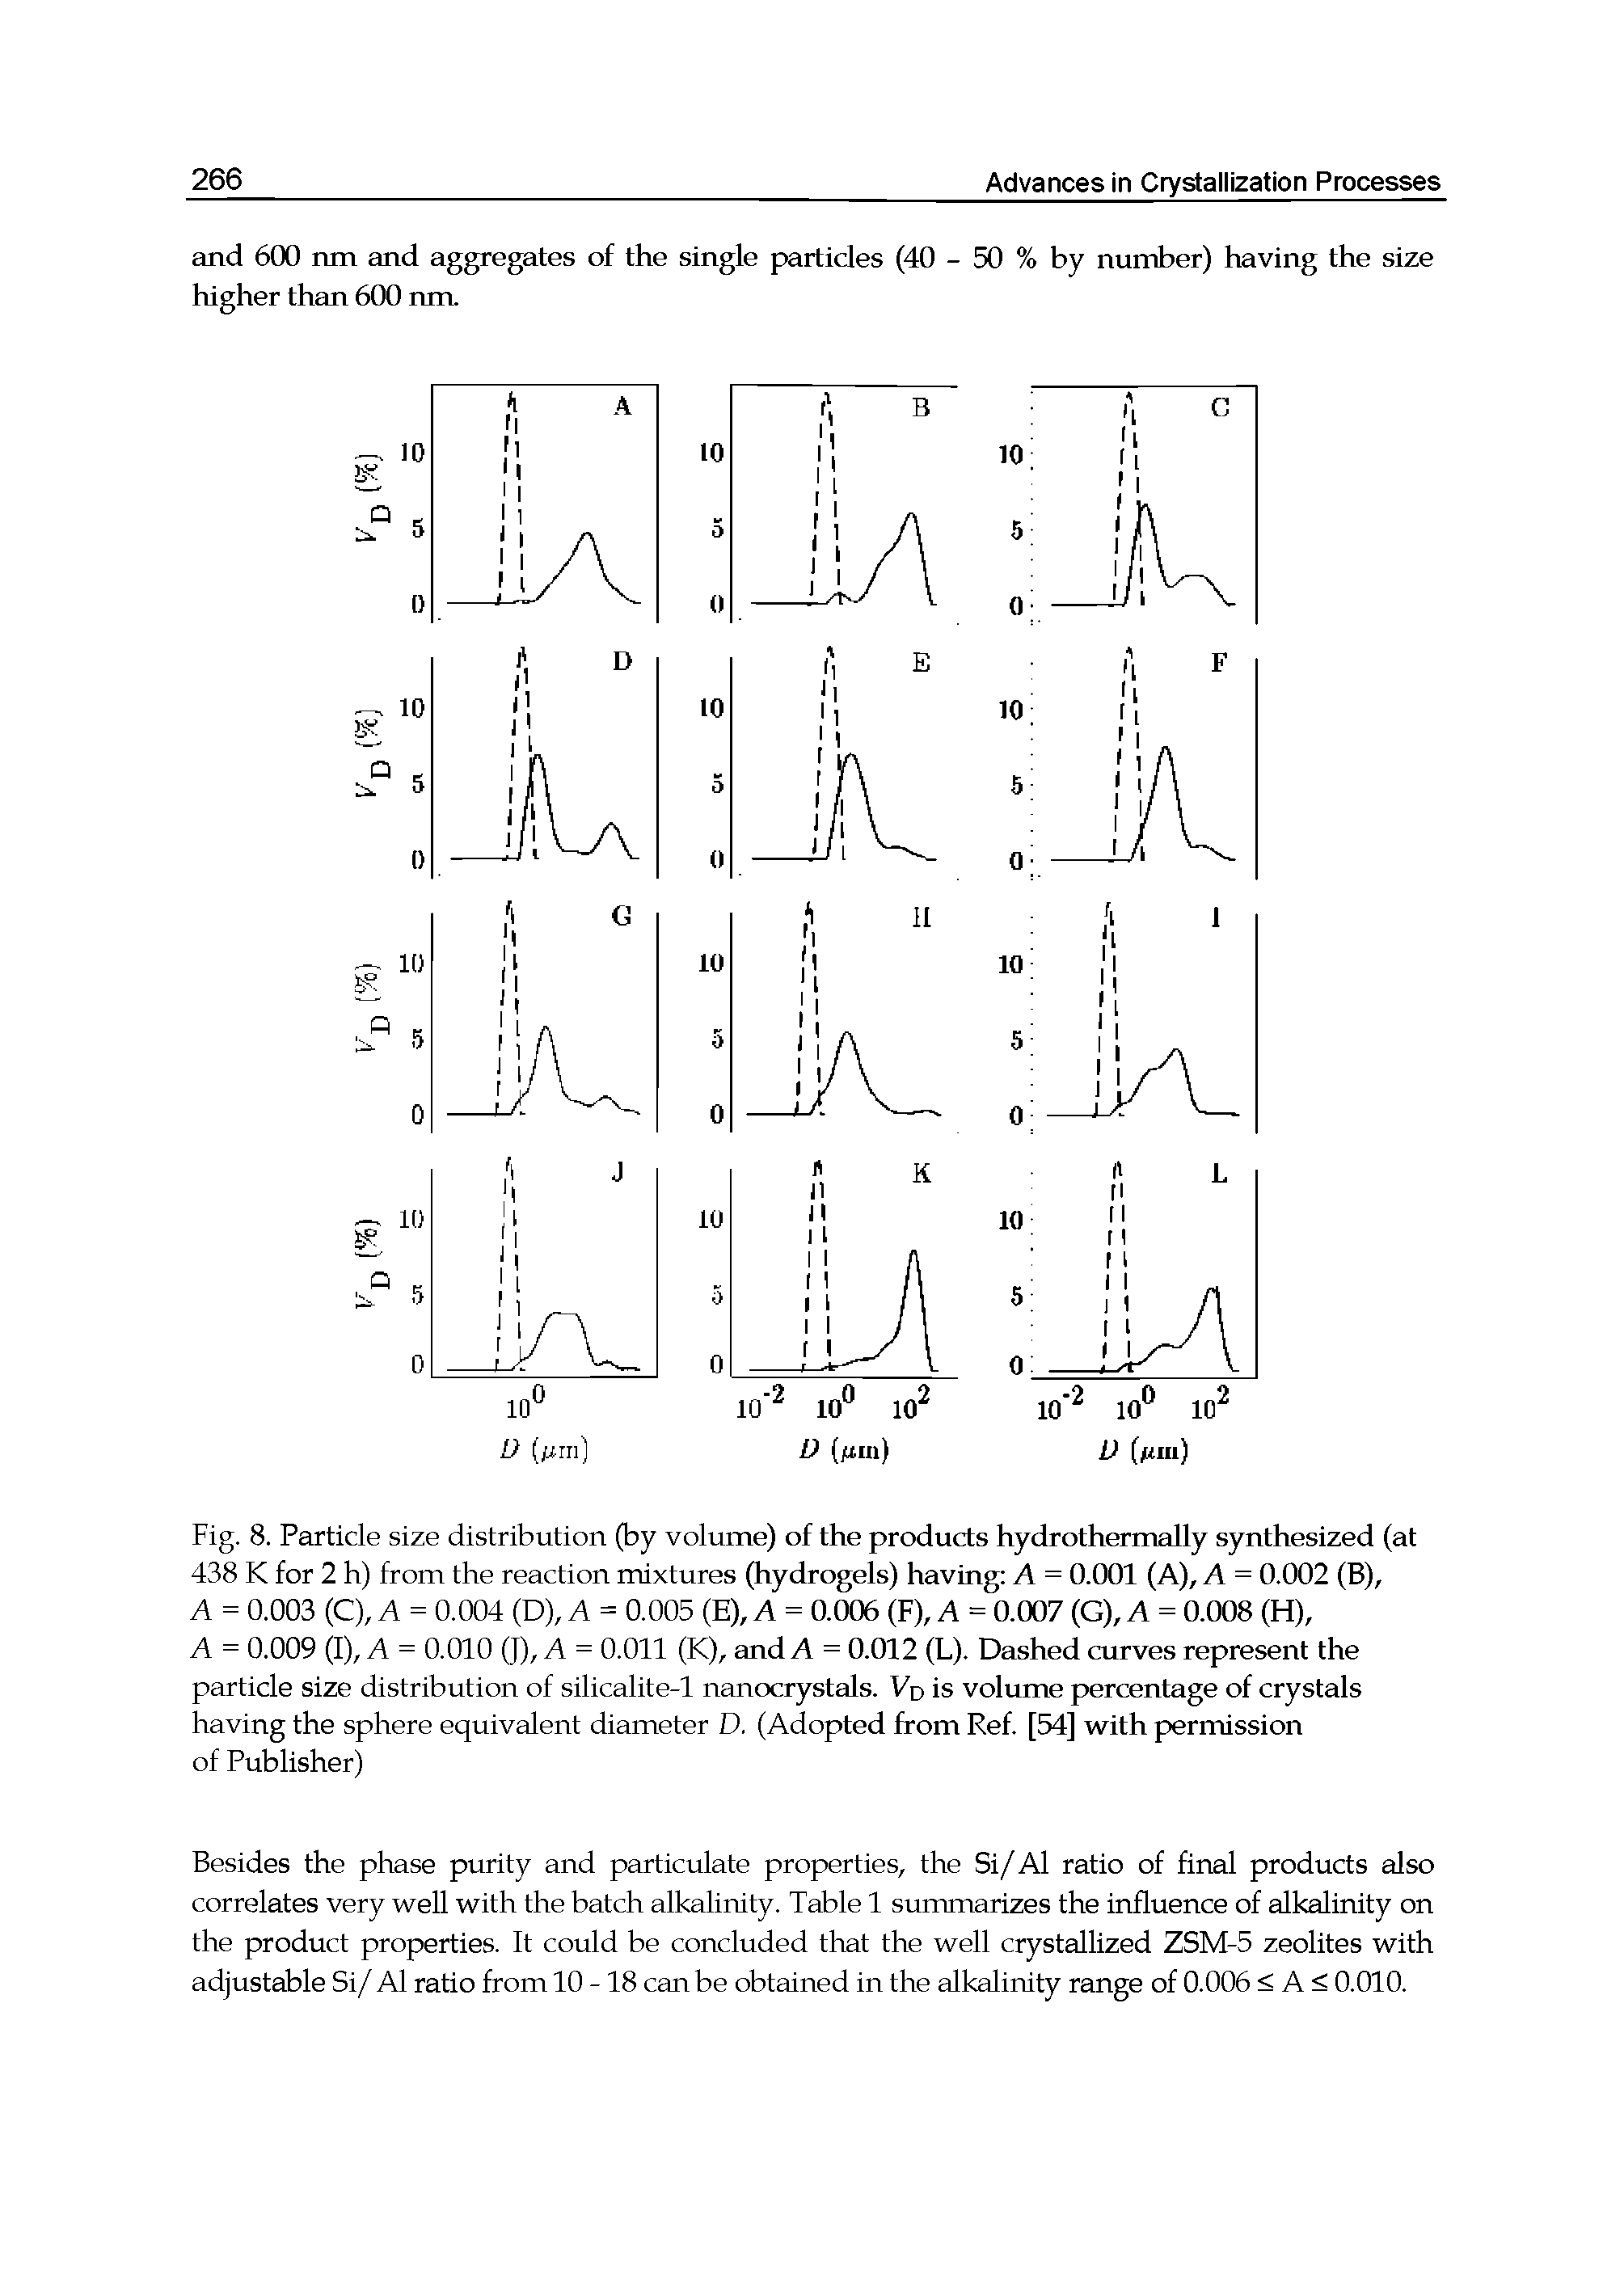 Fig. 8. Particle size distribution (by volume) of the products hydrothermally synthesized (at 438 K for 2 h) from the reaction mixtures (hydrogels) having A = 0.001 (A), A = 0.002 (B),...